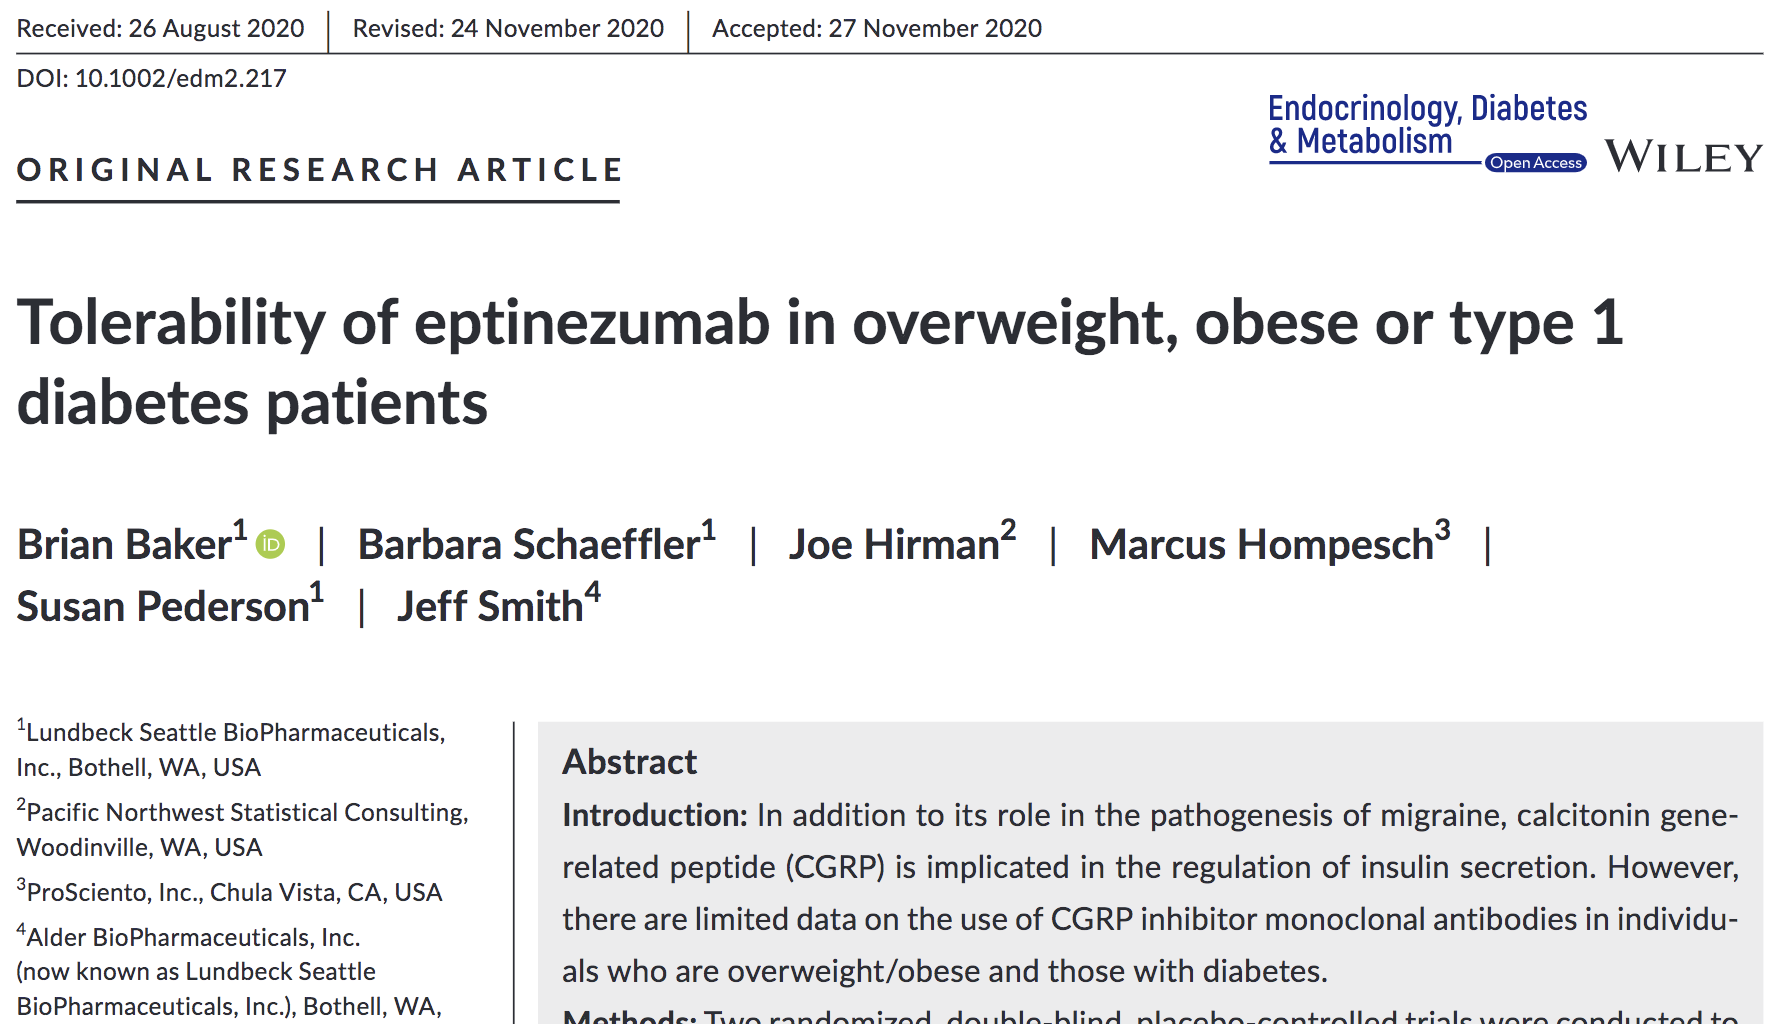 image of Tolerability of eptinezumab in overweight, obese or type 1 diabetes patients.